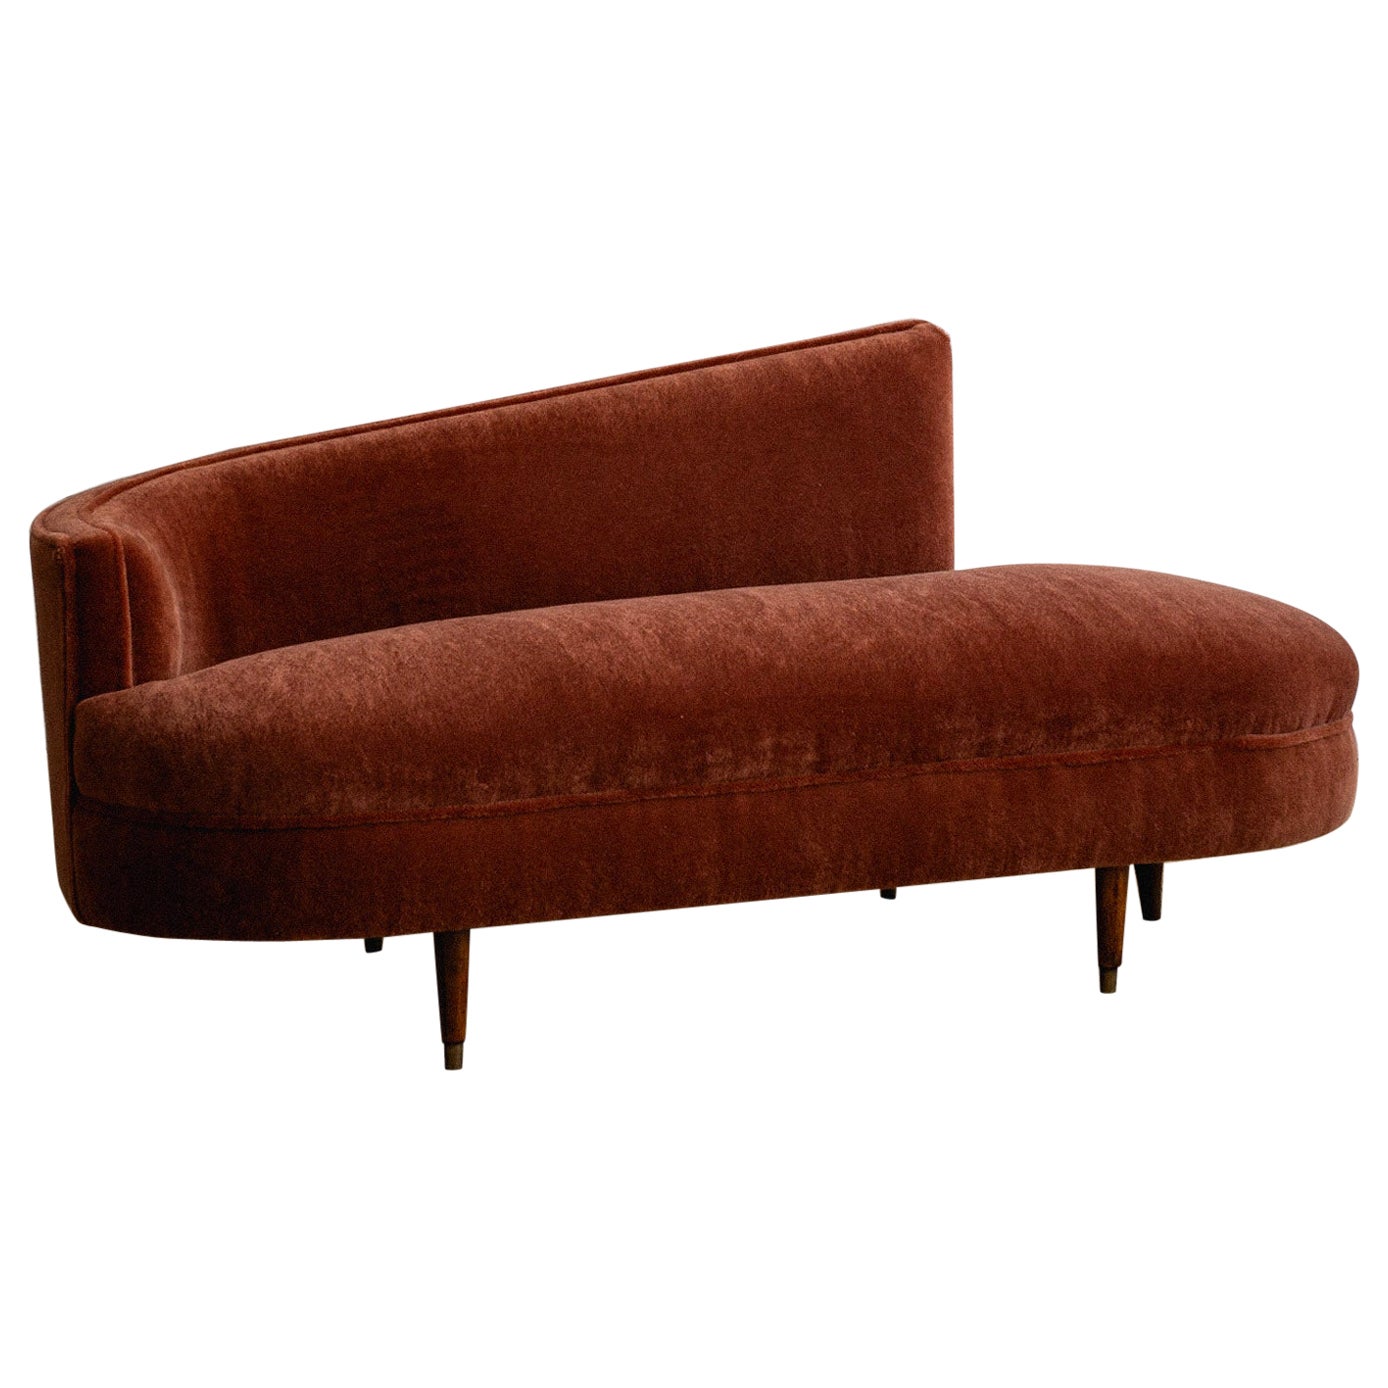 Petite Italian Chaise Lounge in Rust Mohair